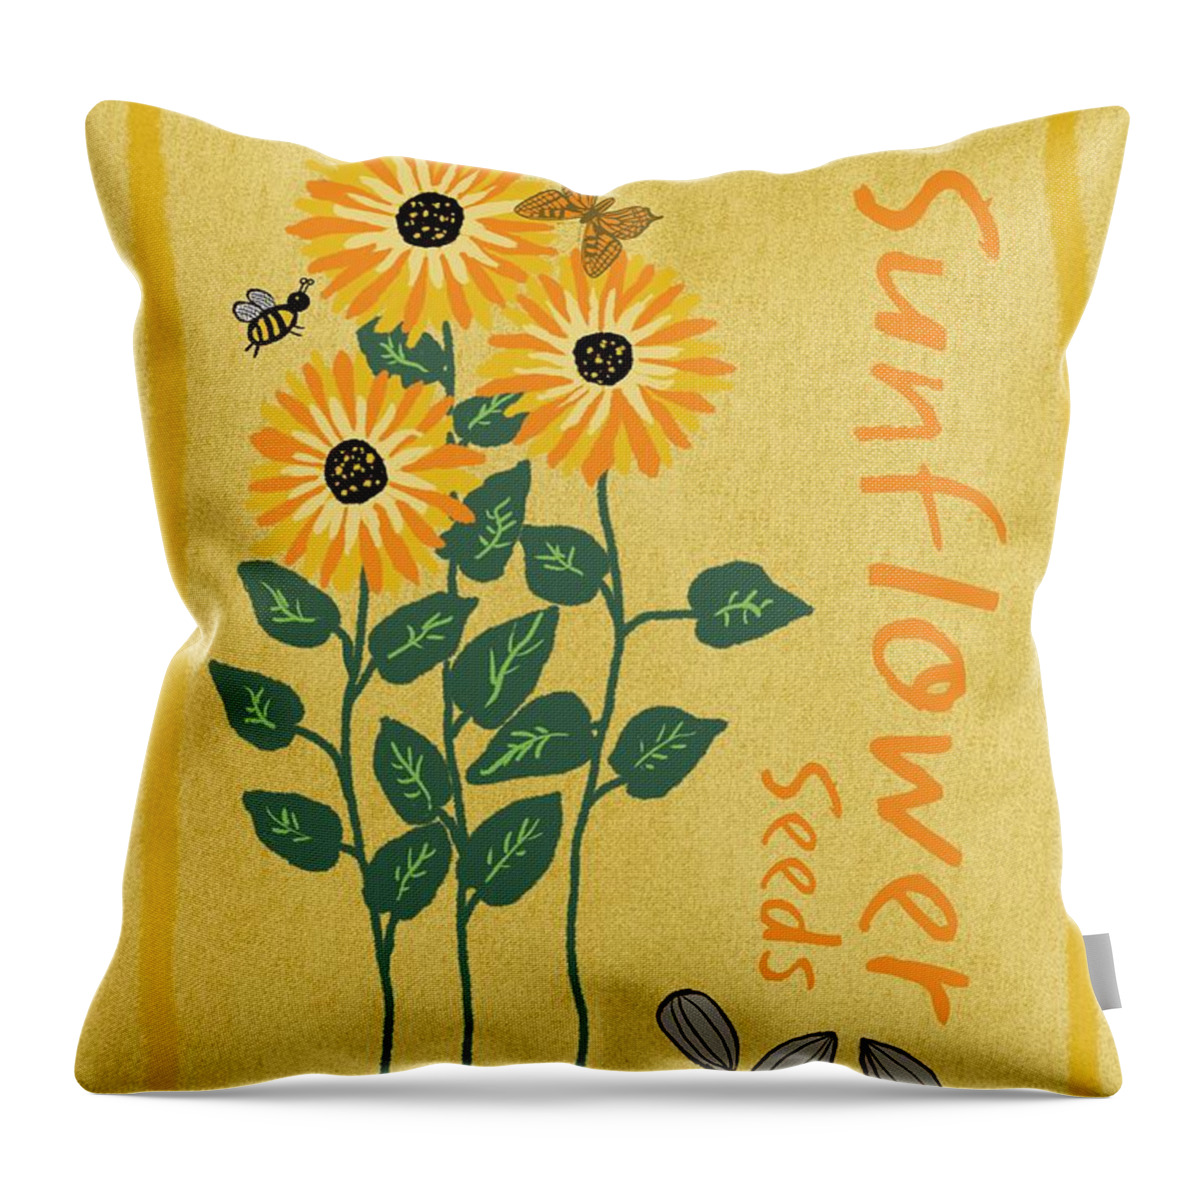 Sunflower Seeds Throw Pillow featuring the painting Sunflower Seeds by Marcy Brennan